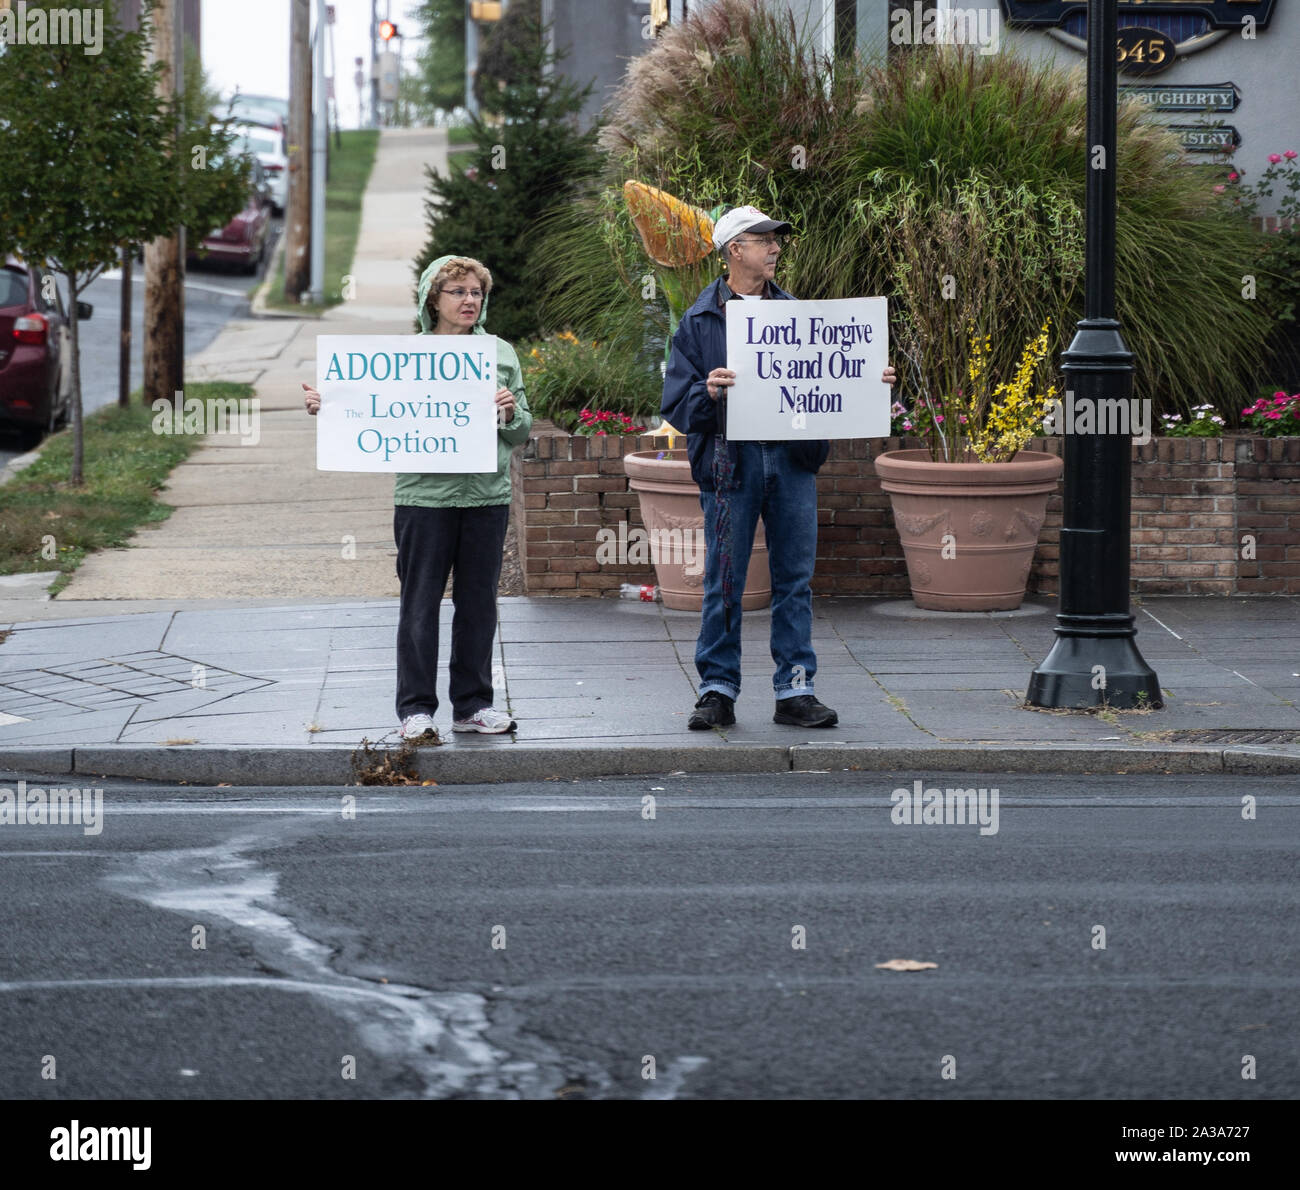 West Reading, Pennsylvania/USA – October 6, 2019: Life Chain Event: Senior couple particpates Life Chain Event, anti-abortion protest. Stock Photo